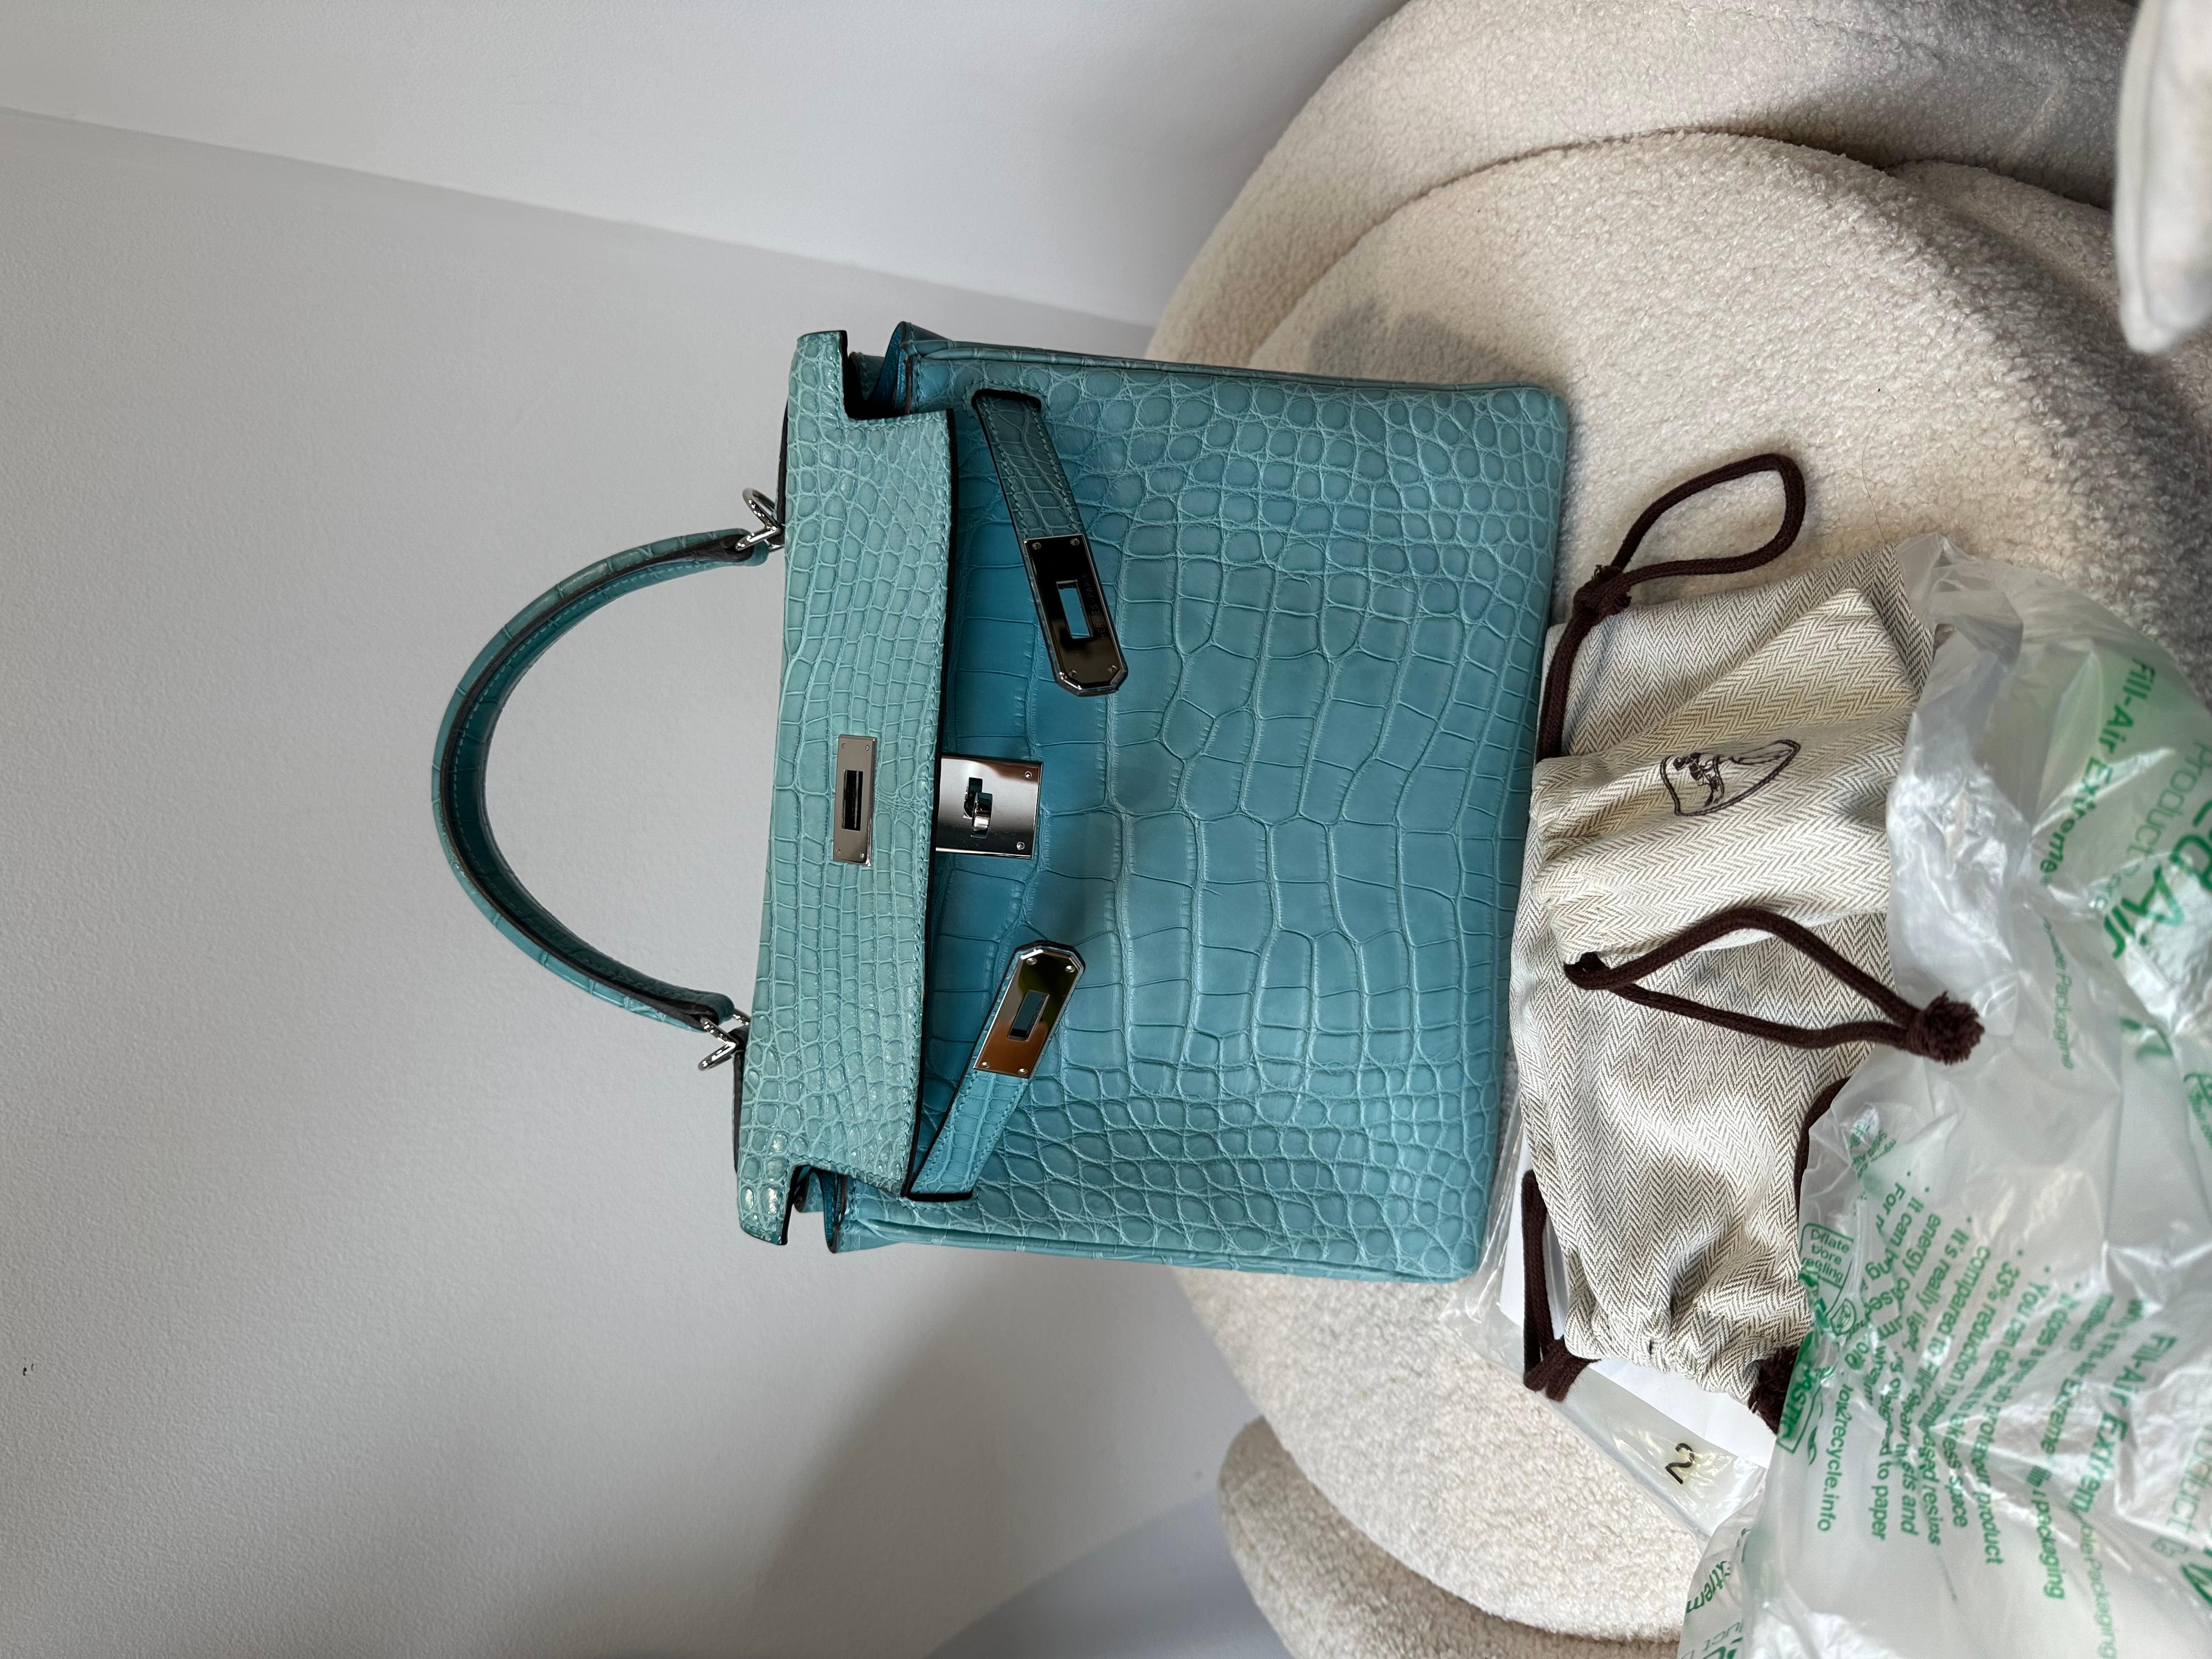 Hermes Kelly 28cm Bleu St Cyr Matte Croc phw bag. 
A simply stunning 28cm Hermes Kelly in Matte alligator in Bleu St Cyr which is slightly muted blue. A really special and rare bag.
In as new condition!

With palladium Hardware, full measurements